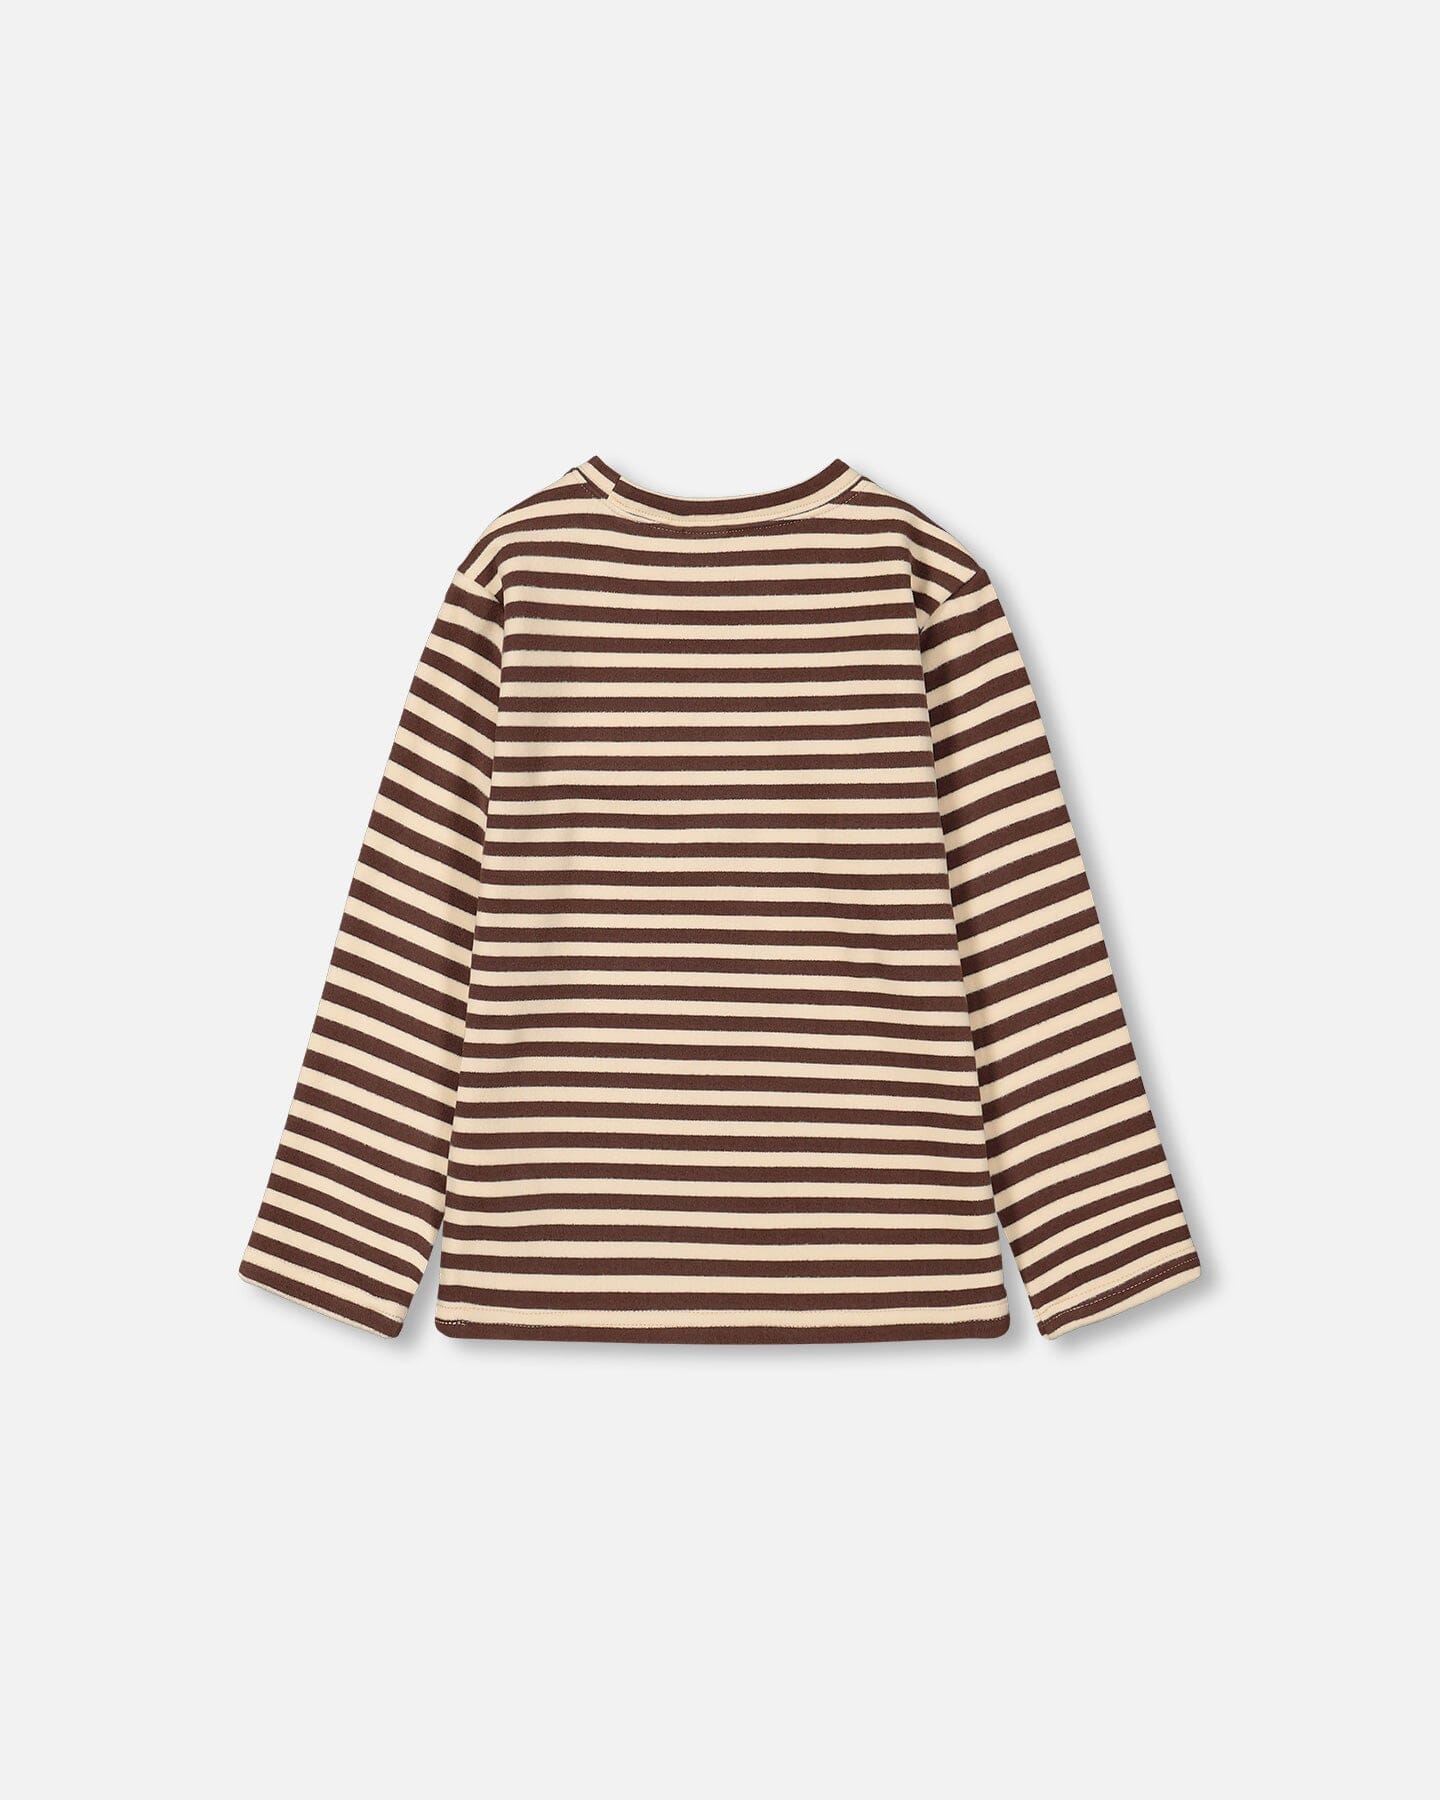 Super Soft Heavy Jersey Brushed T-Shirt With Print Brown And Beige Stripe - F20T72_000